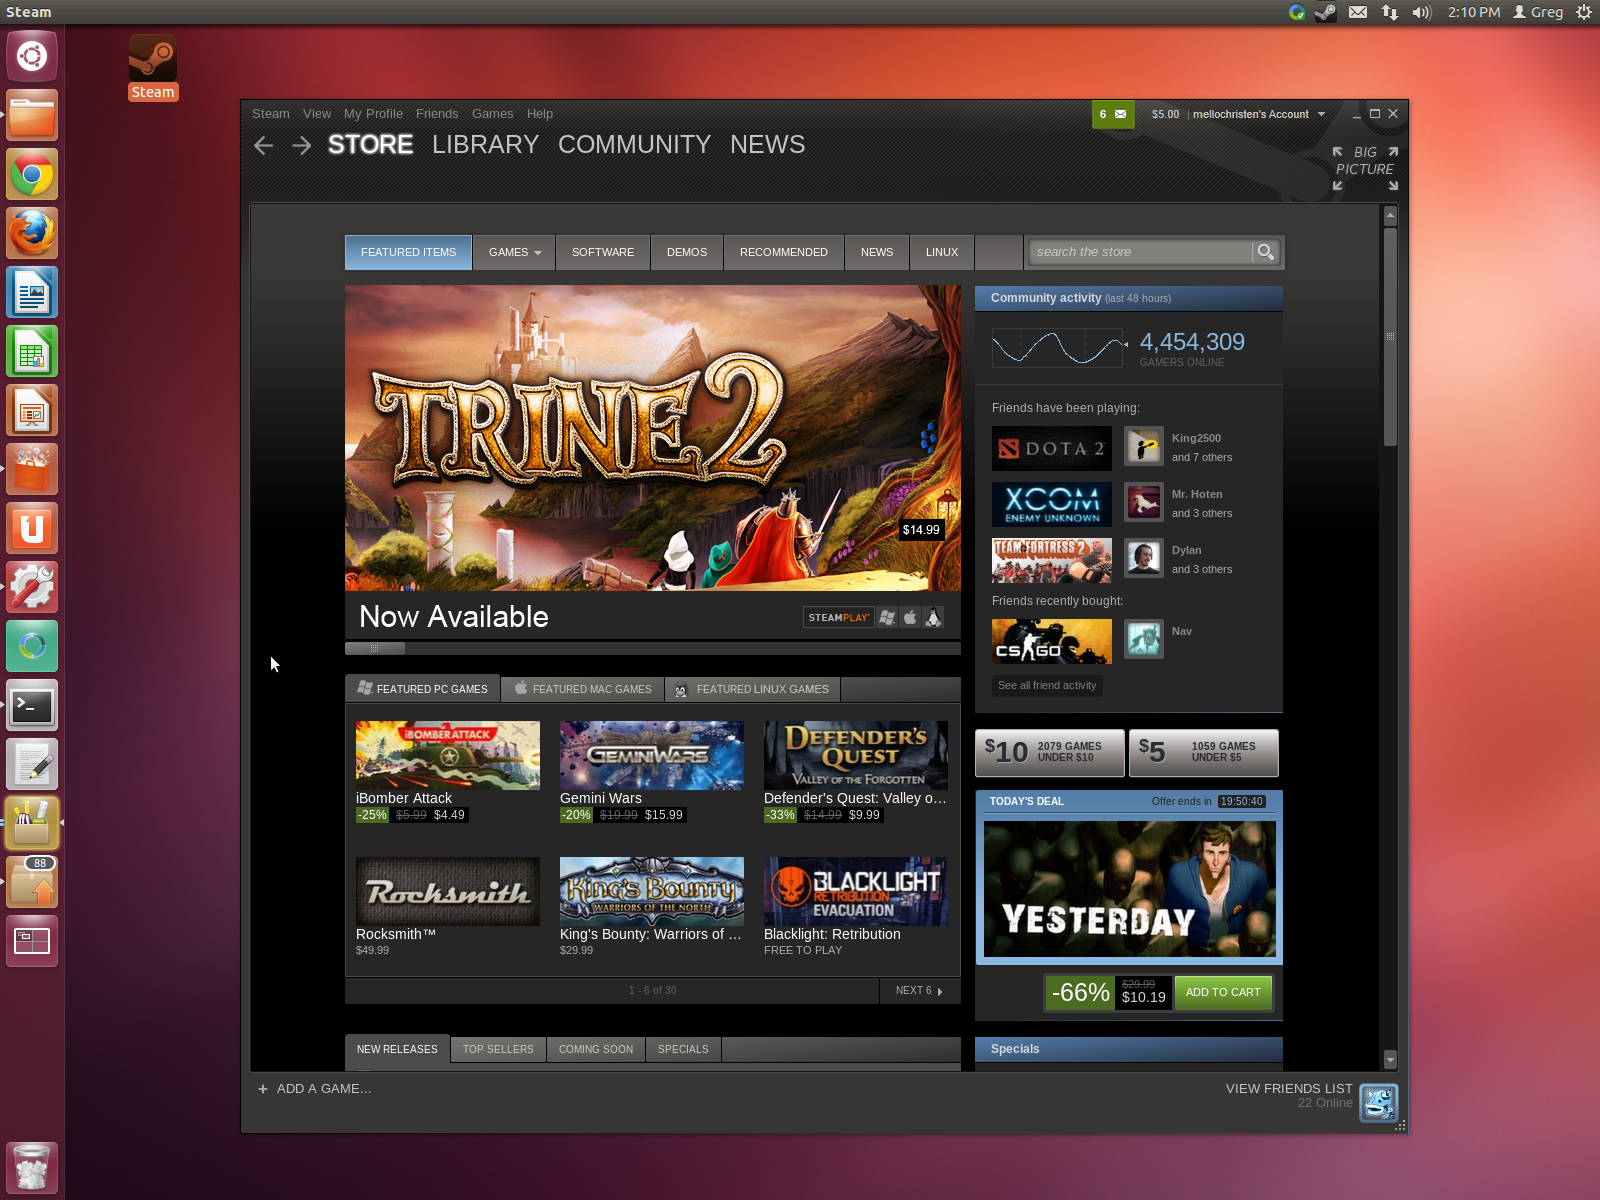 Media asset in full size related to 3dfxzone.it news item entitled as follows: Terminata la beta Valve annuncia ufficialmente Steam per Linux | Image Name: news18957_Steam-for-Linux_2.png